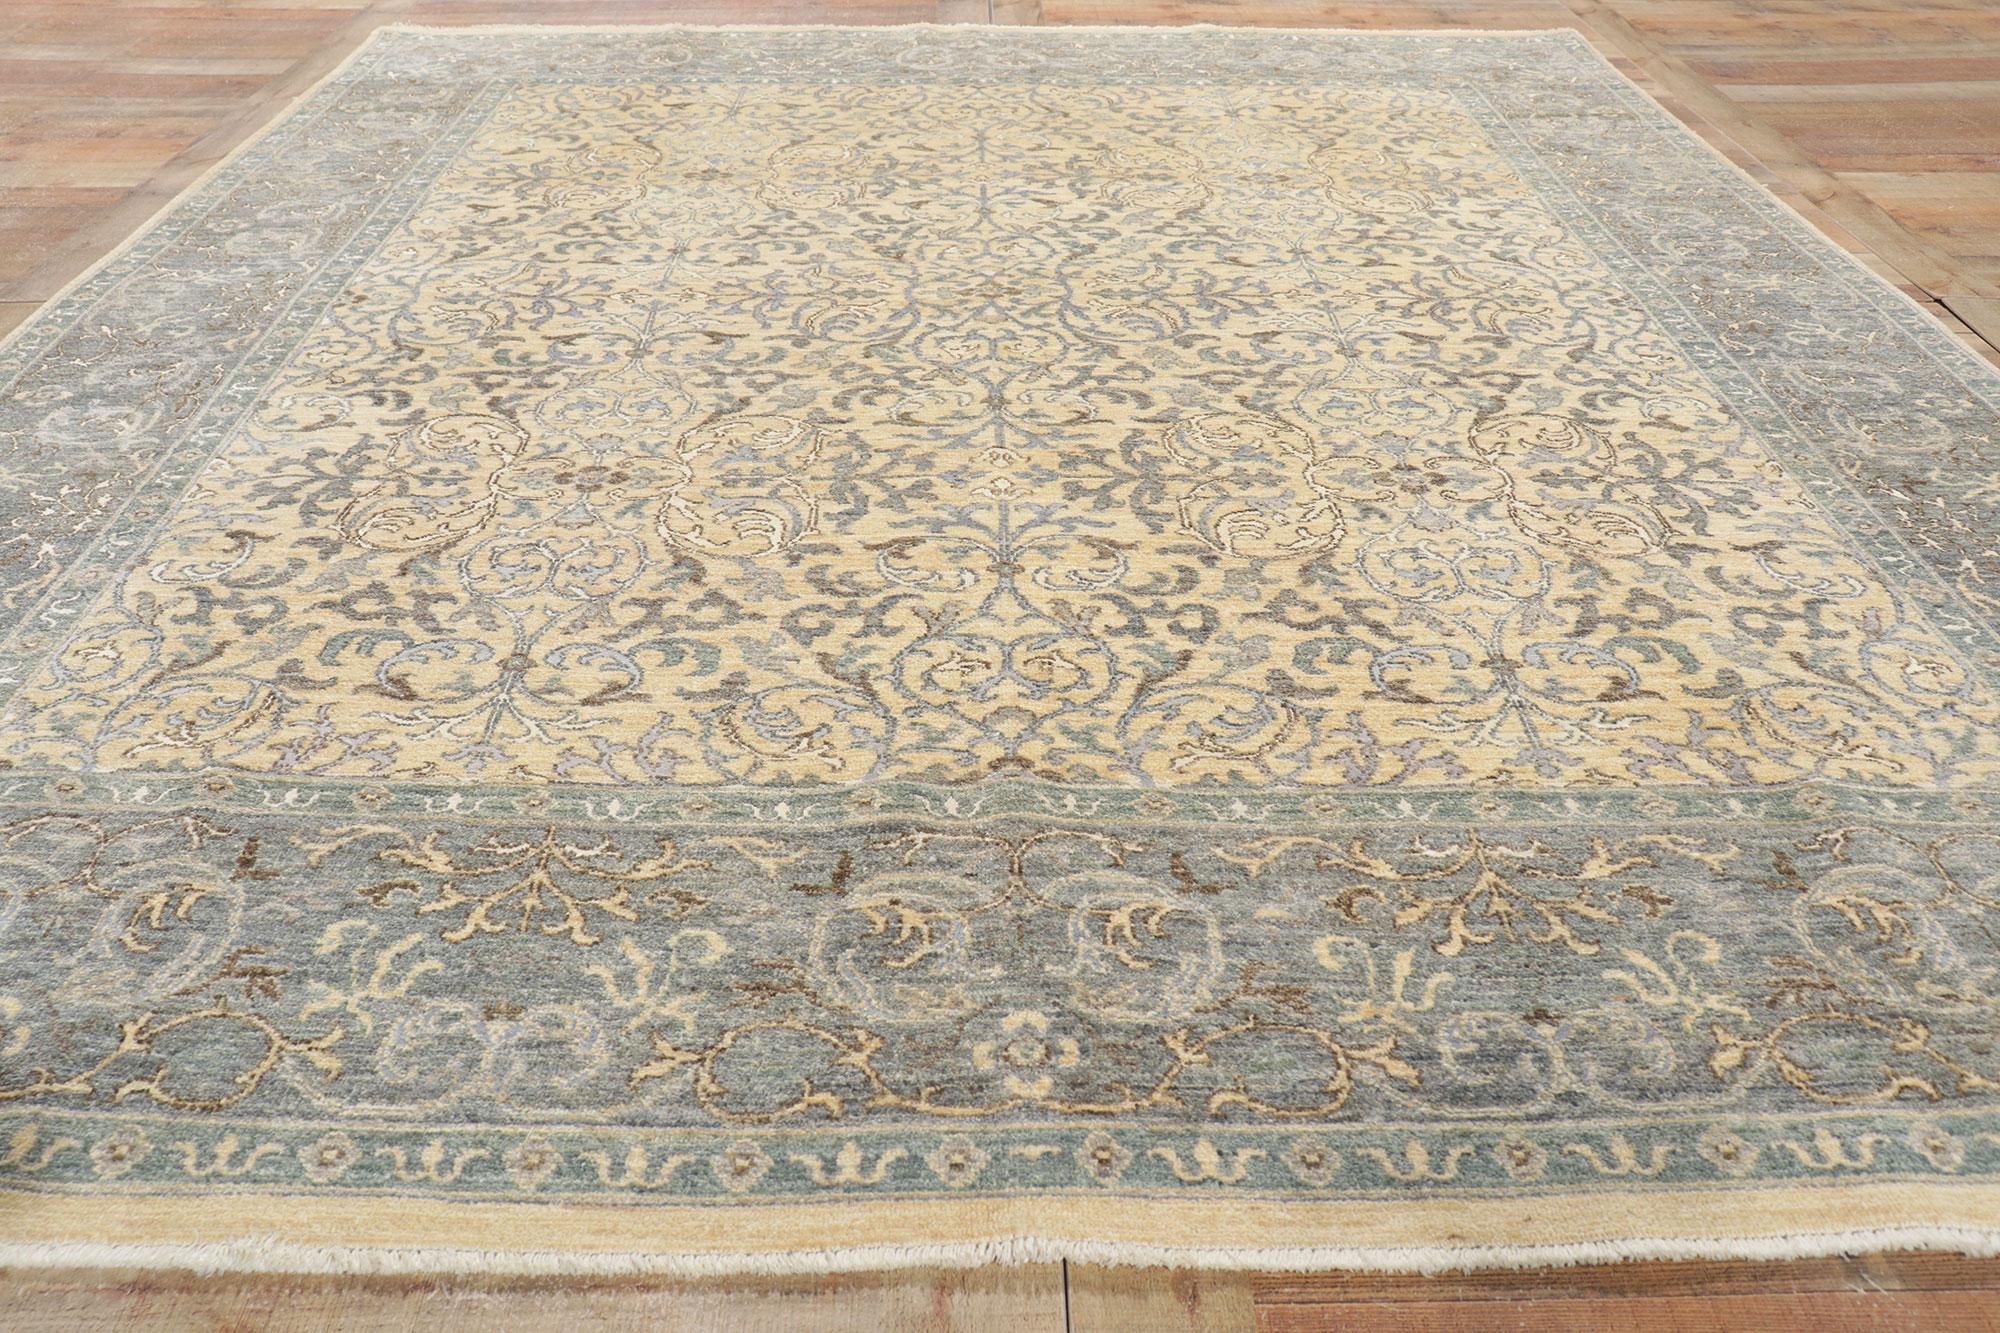 Wool New Transitional Damask Scroll Rug with Soft Earth-Tone Colors For Sale